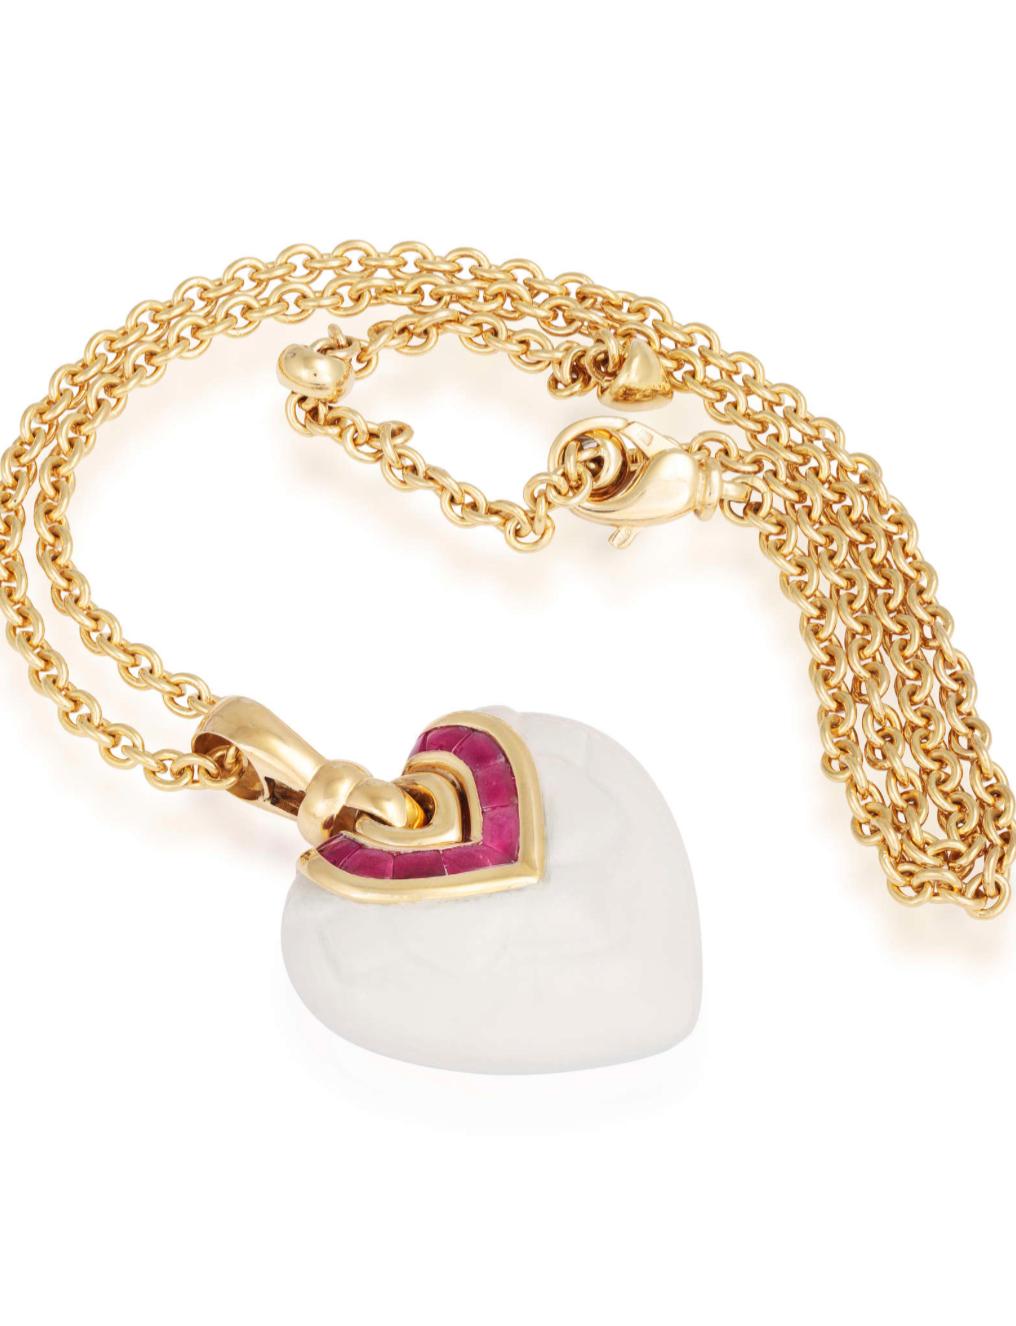 A beautiful pendant on chain in 18 k yellow gold and white porcelain by Bulgari. from the very collectible “Chandra” collection, Made in Italy, circa 1990.
Designed as a series of part textured porcelain spheres, the heart-shaped white ceramic